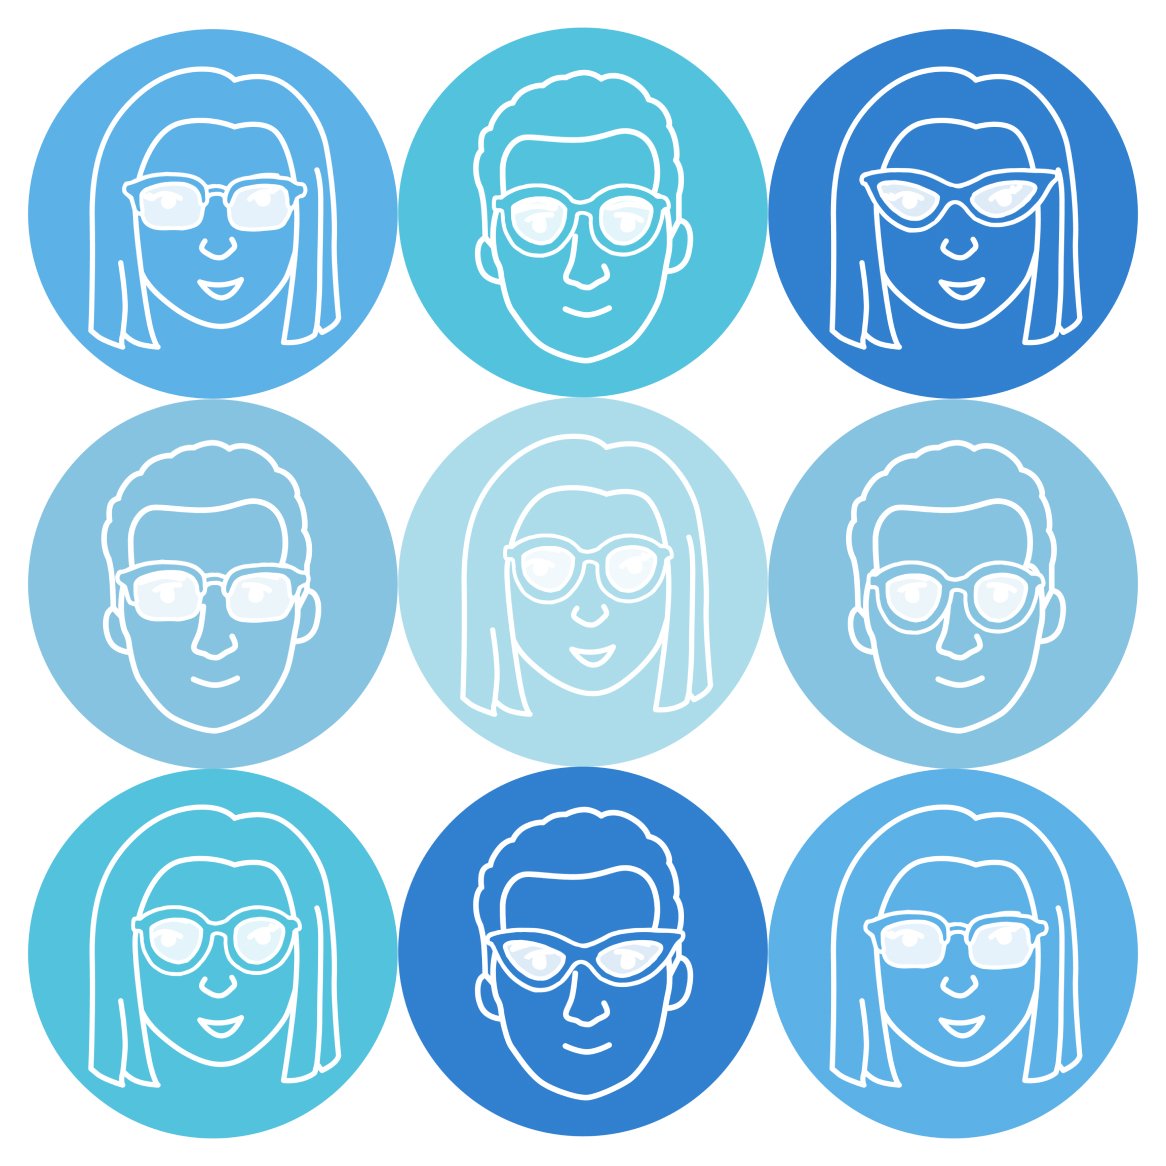 Blue and teal illustrated circular icons of different small face types wearing sunglasses